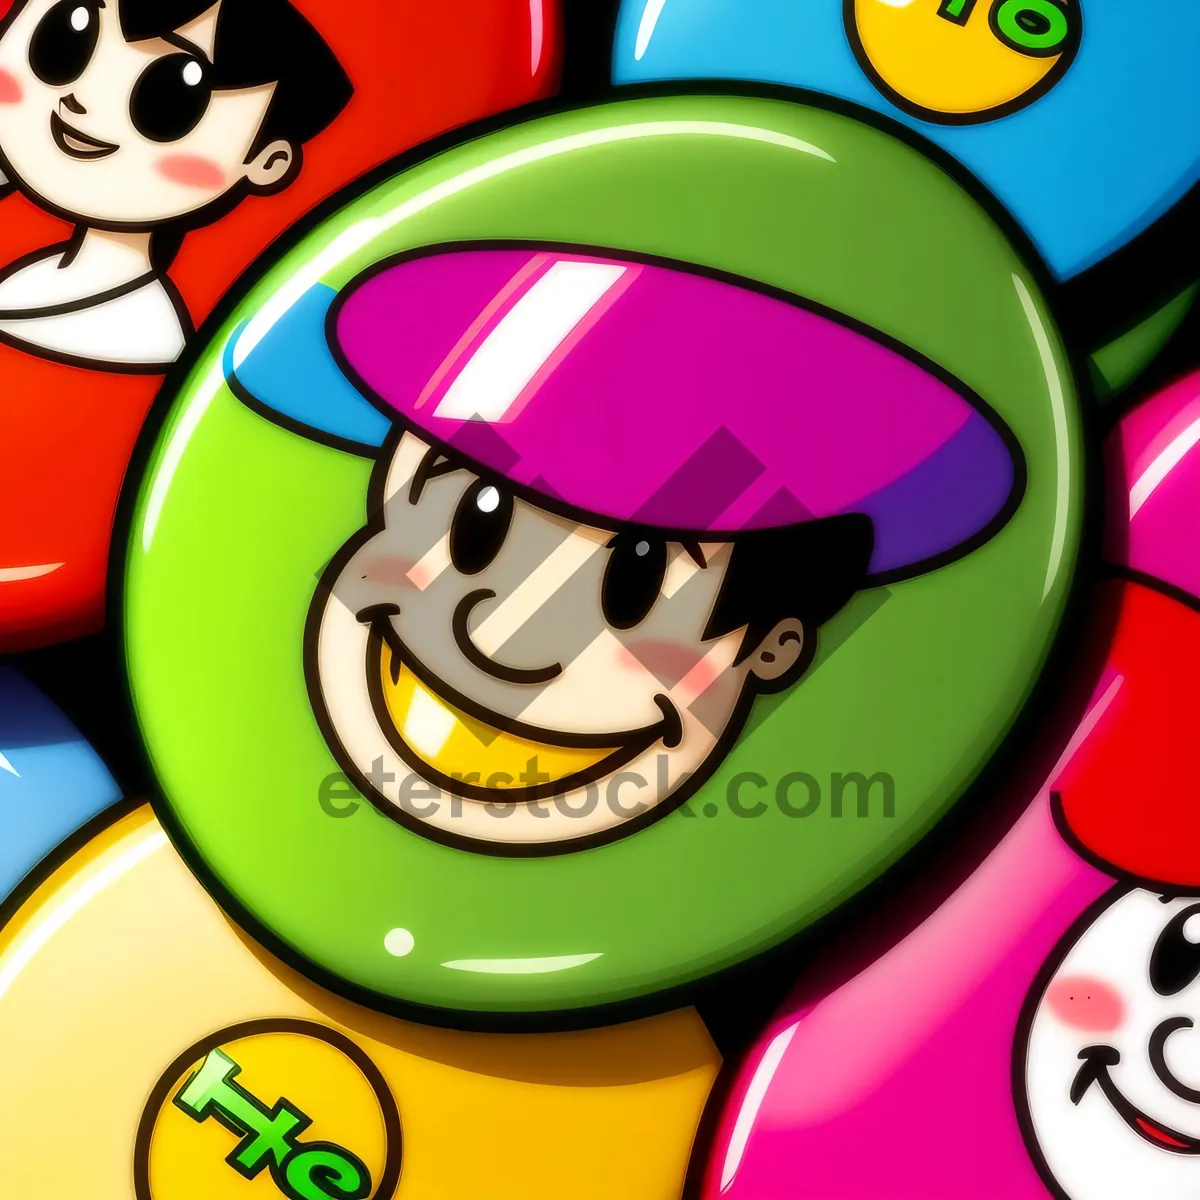 Picture of Cute Cartoon Jelly Bus Icon - Happy, Fun, and Playful Design